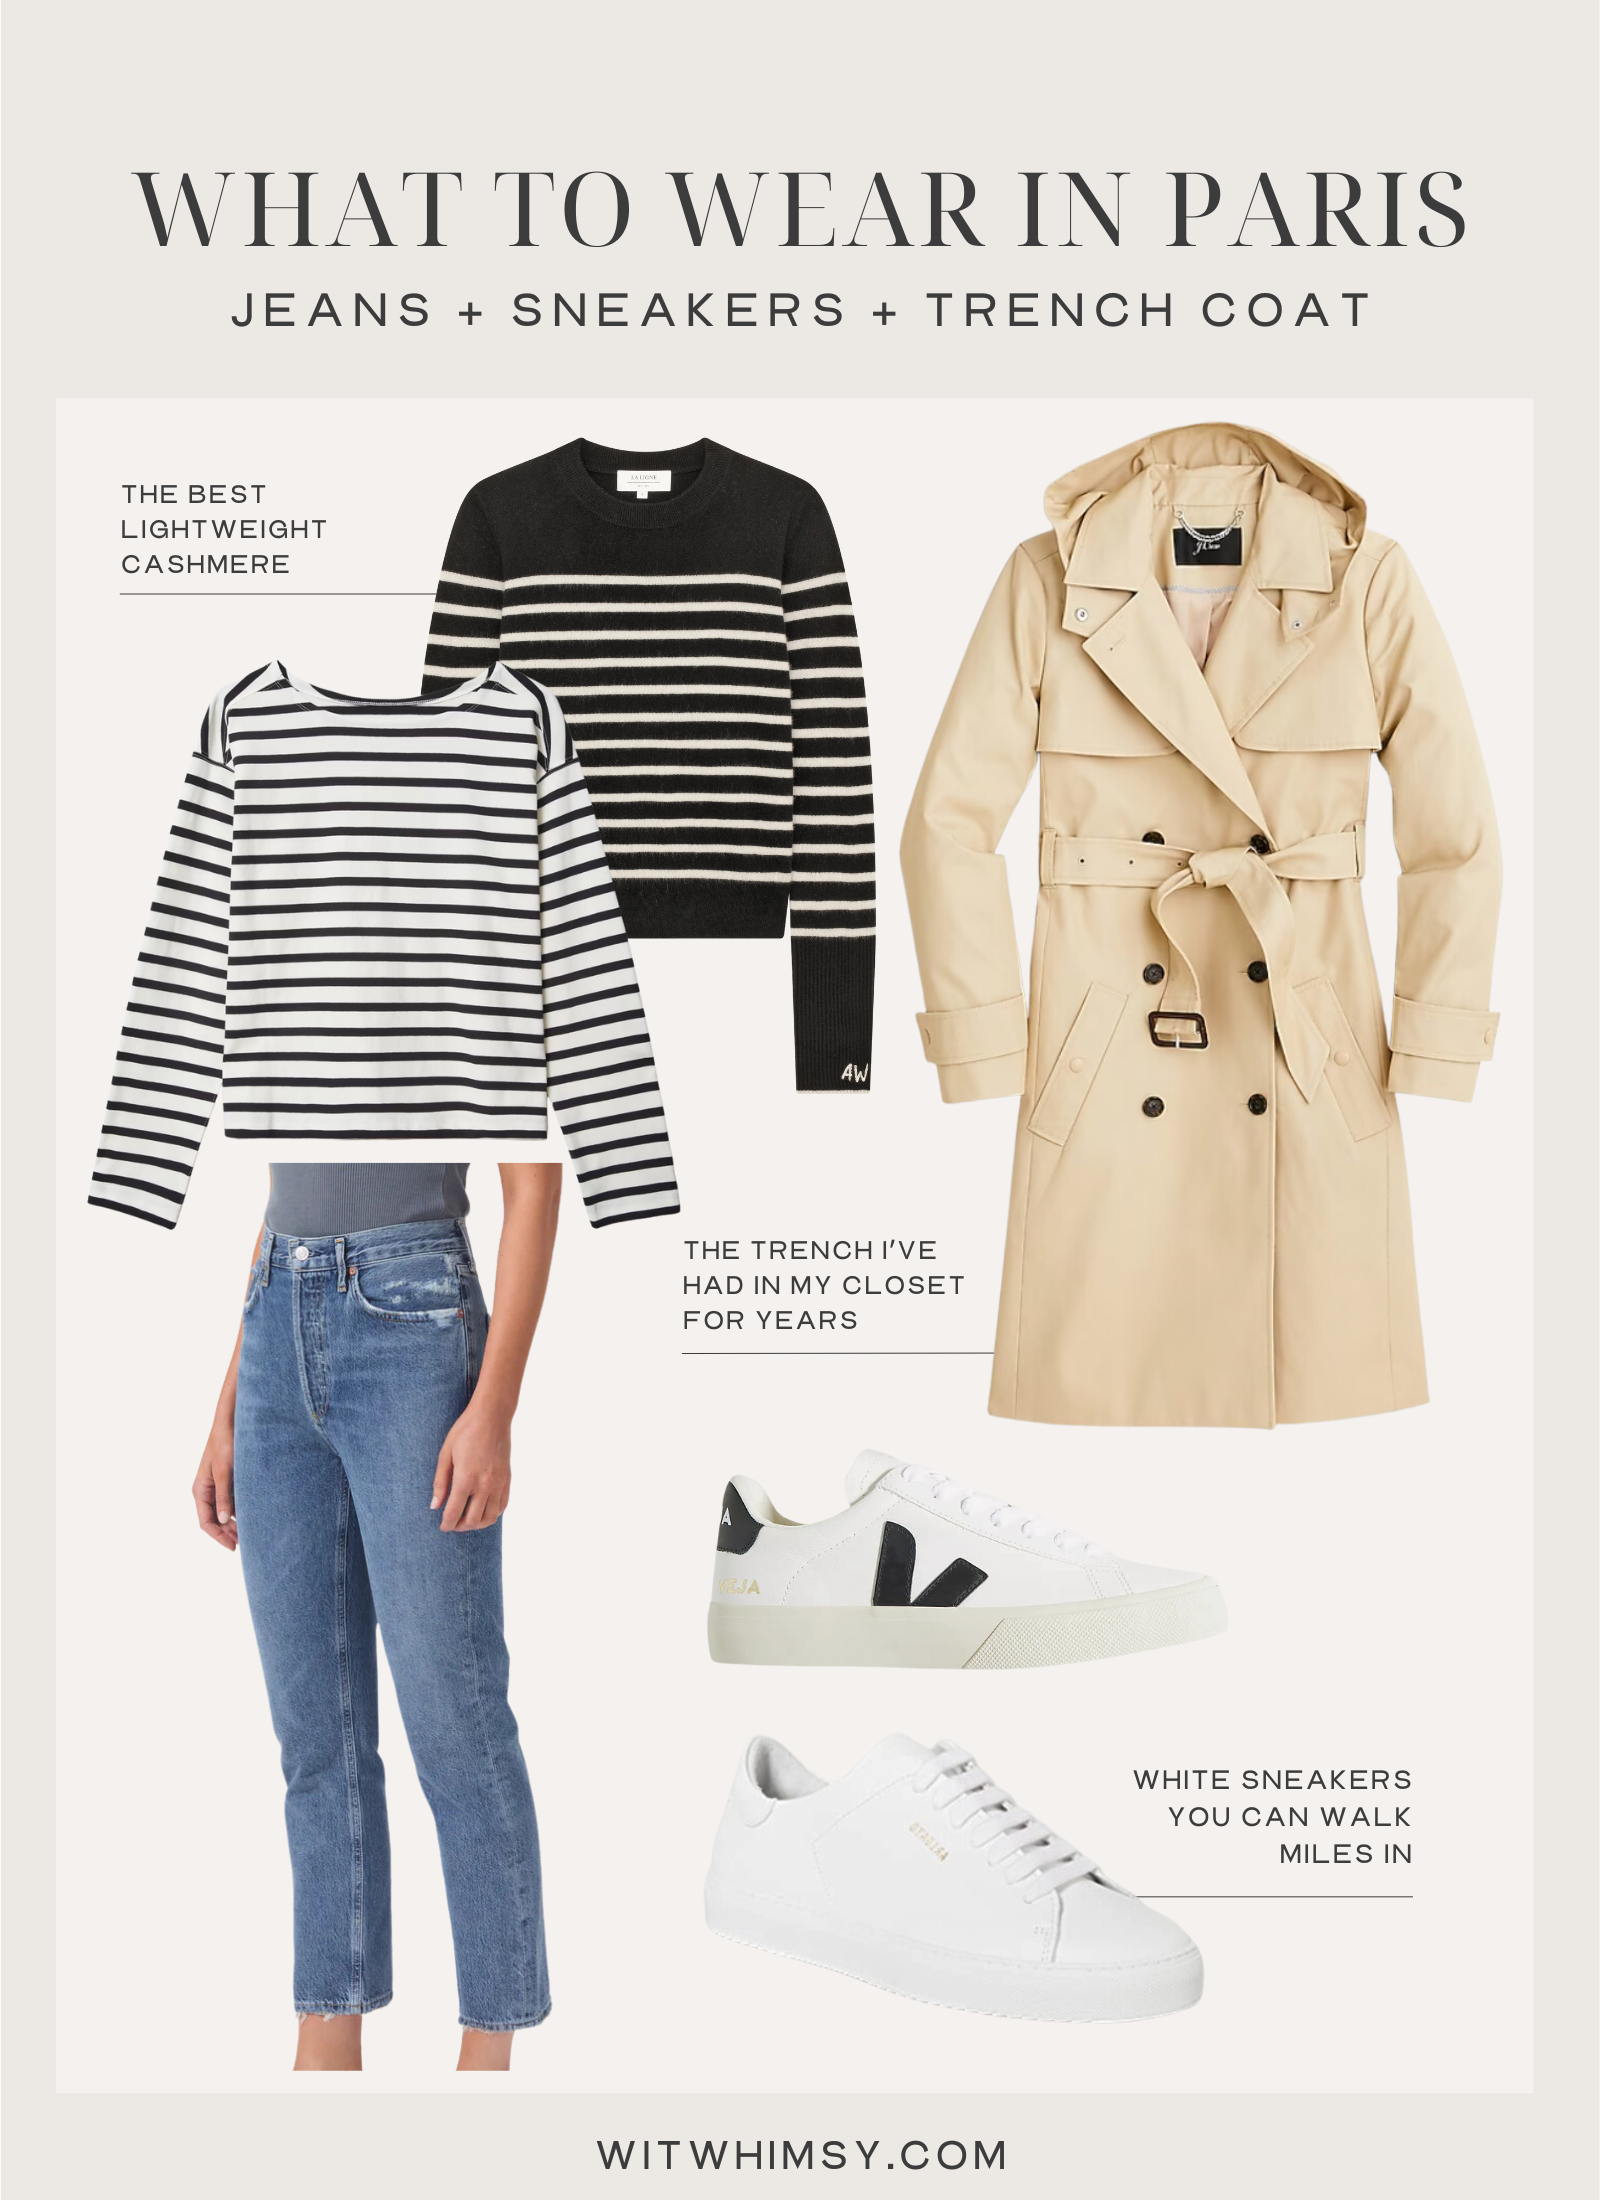 What to Wear in Paris in the Spring collage striped shirt, trench coat, jeans, and sneakers